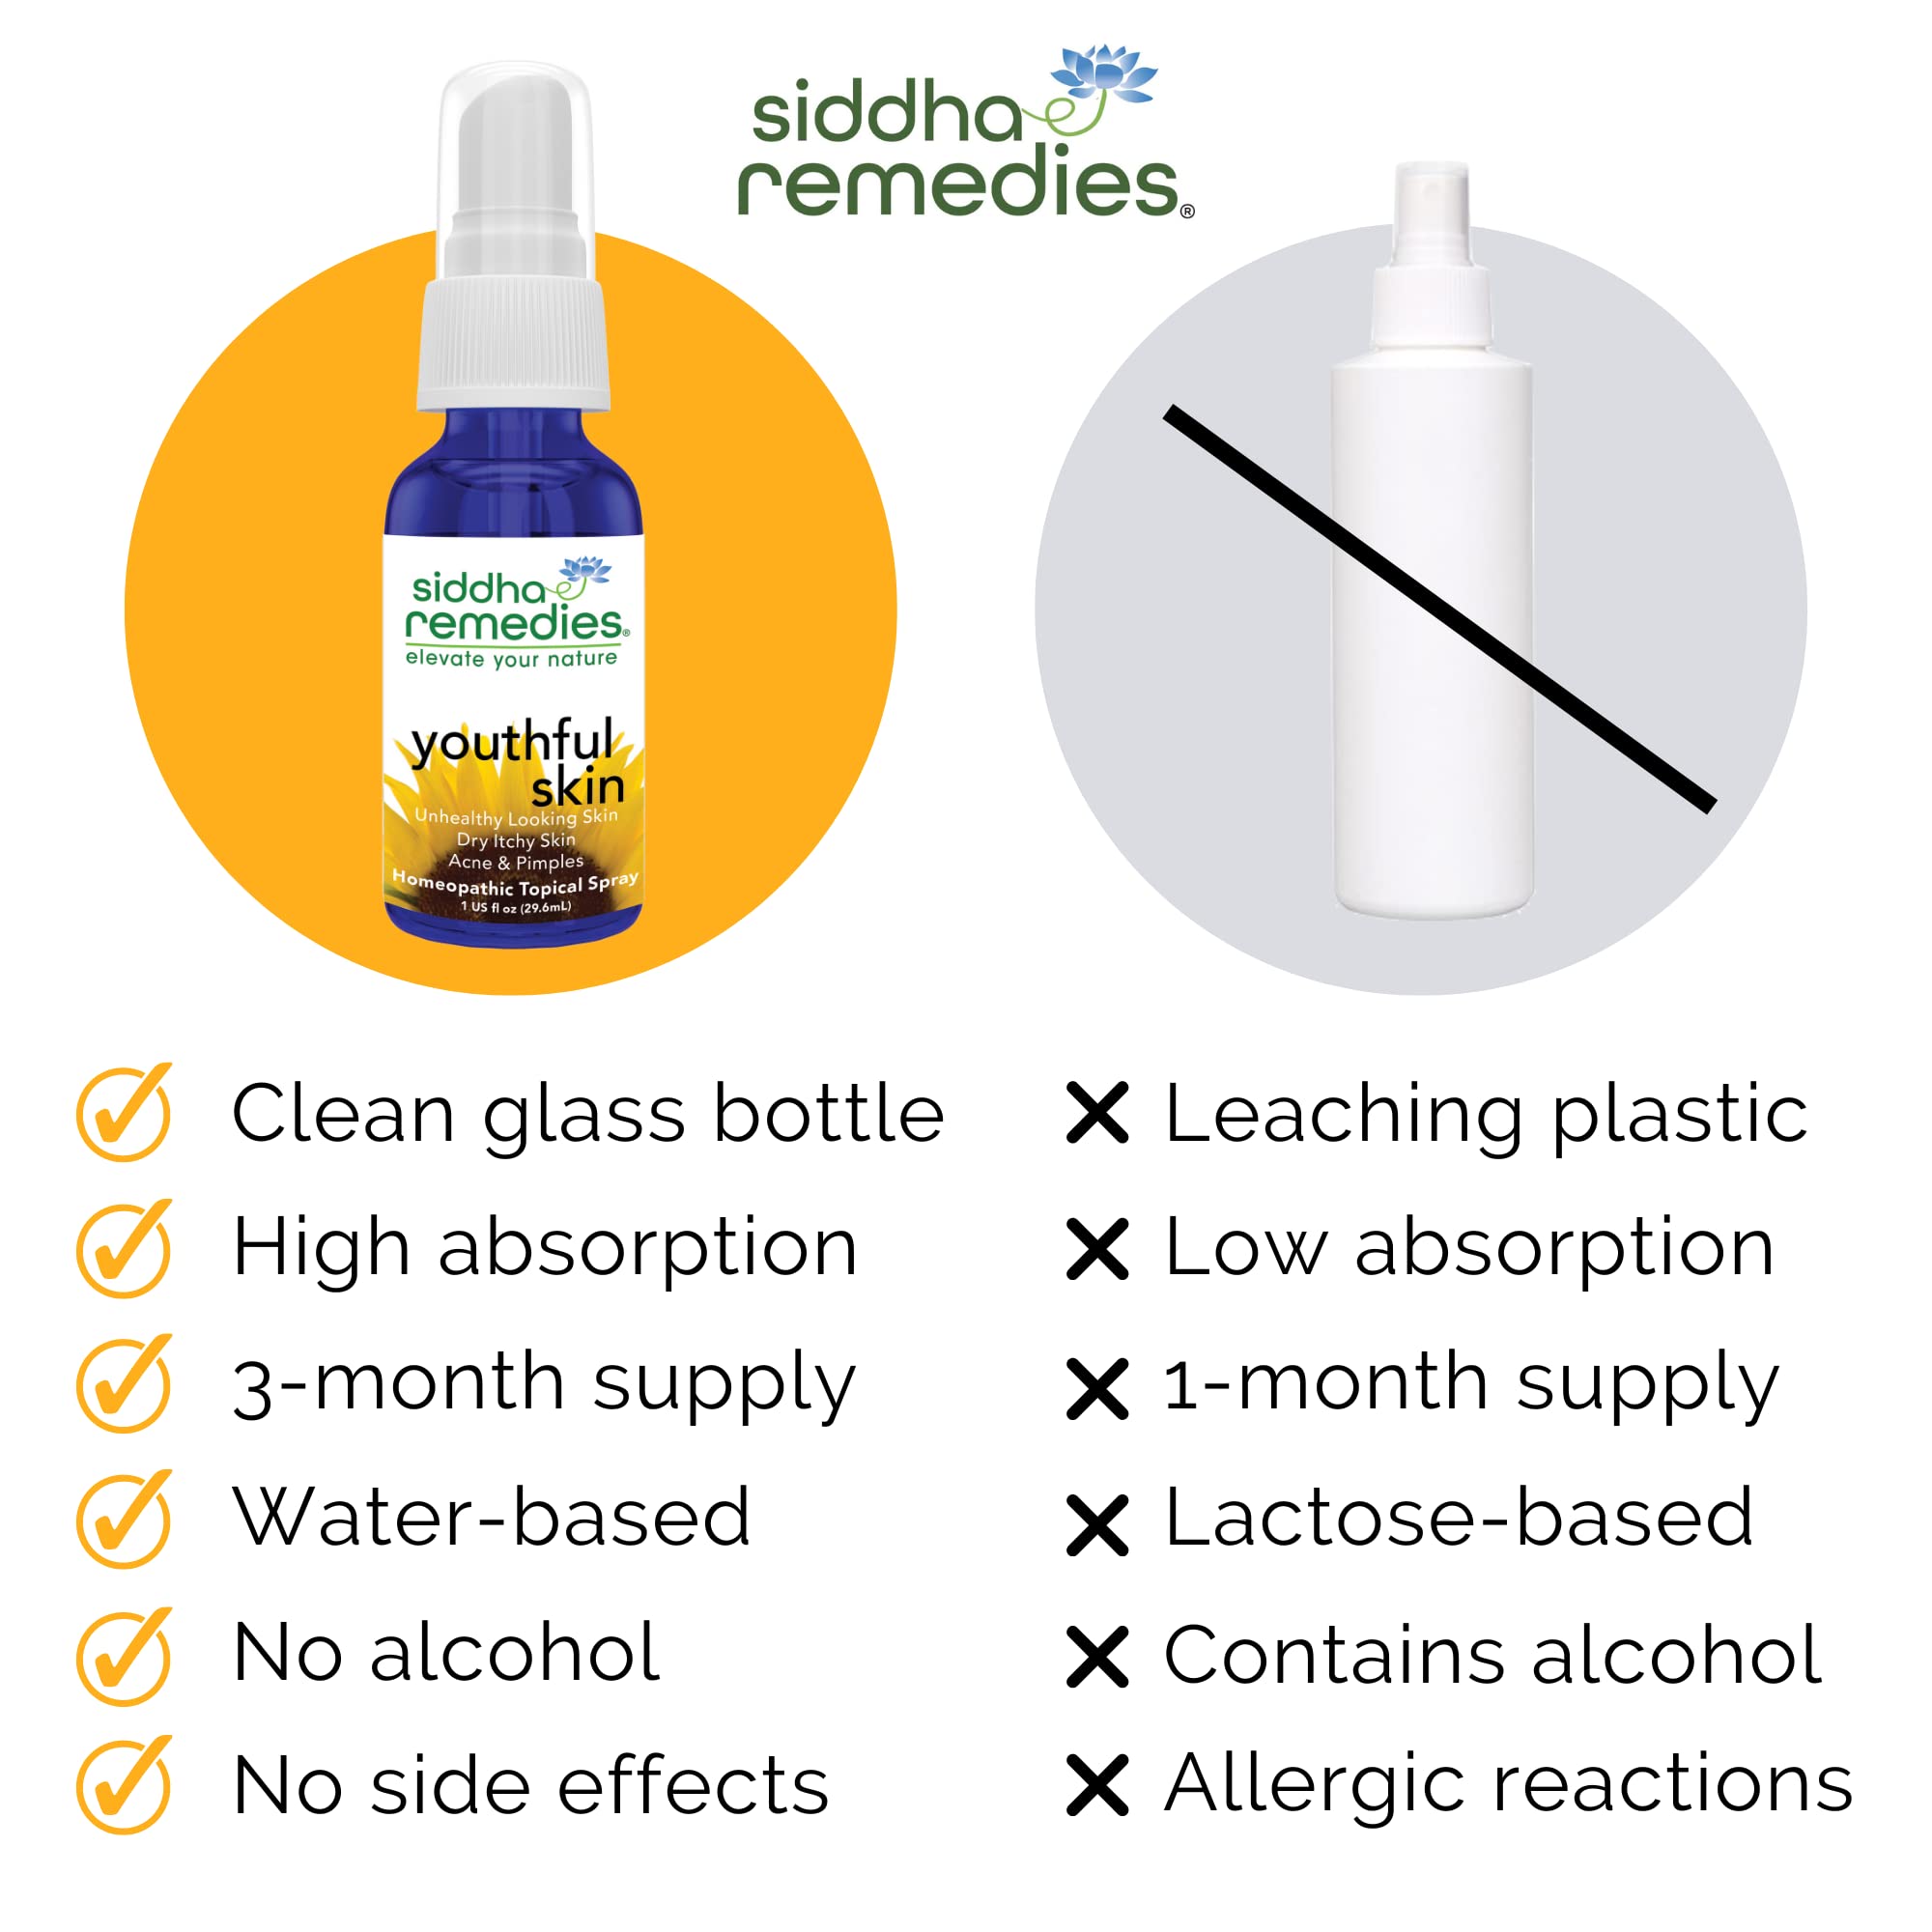 Siddha Remedies Youthful Skin Cell Salts Flower Essences for Dry Itchy Skin, Acne Pimples, Scar Removal | 100% Natural Plant Based Homeopathic Remedy | No Alcohol No Sugar